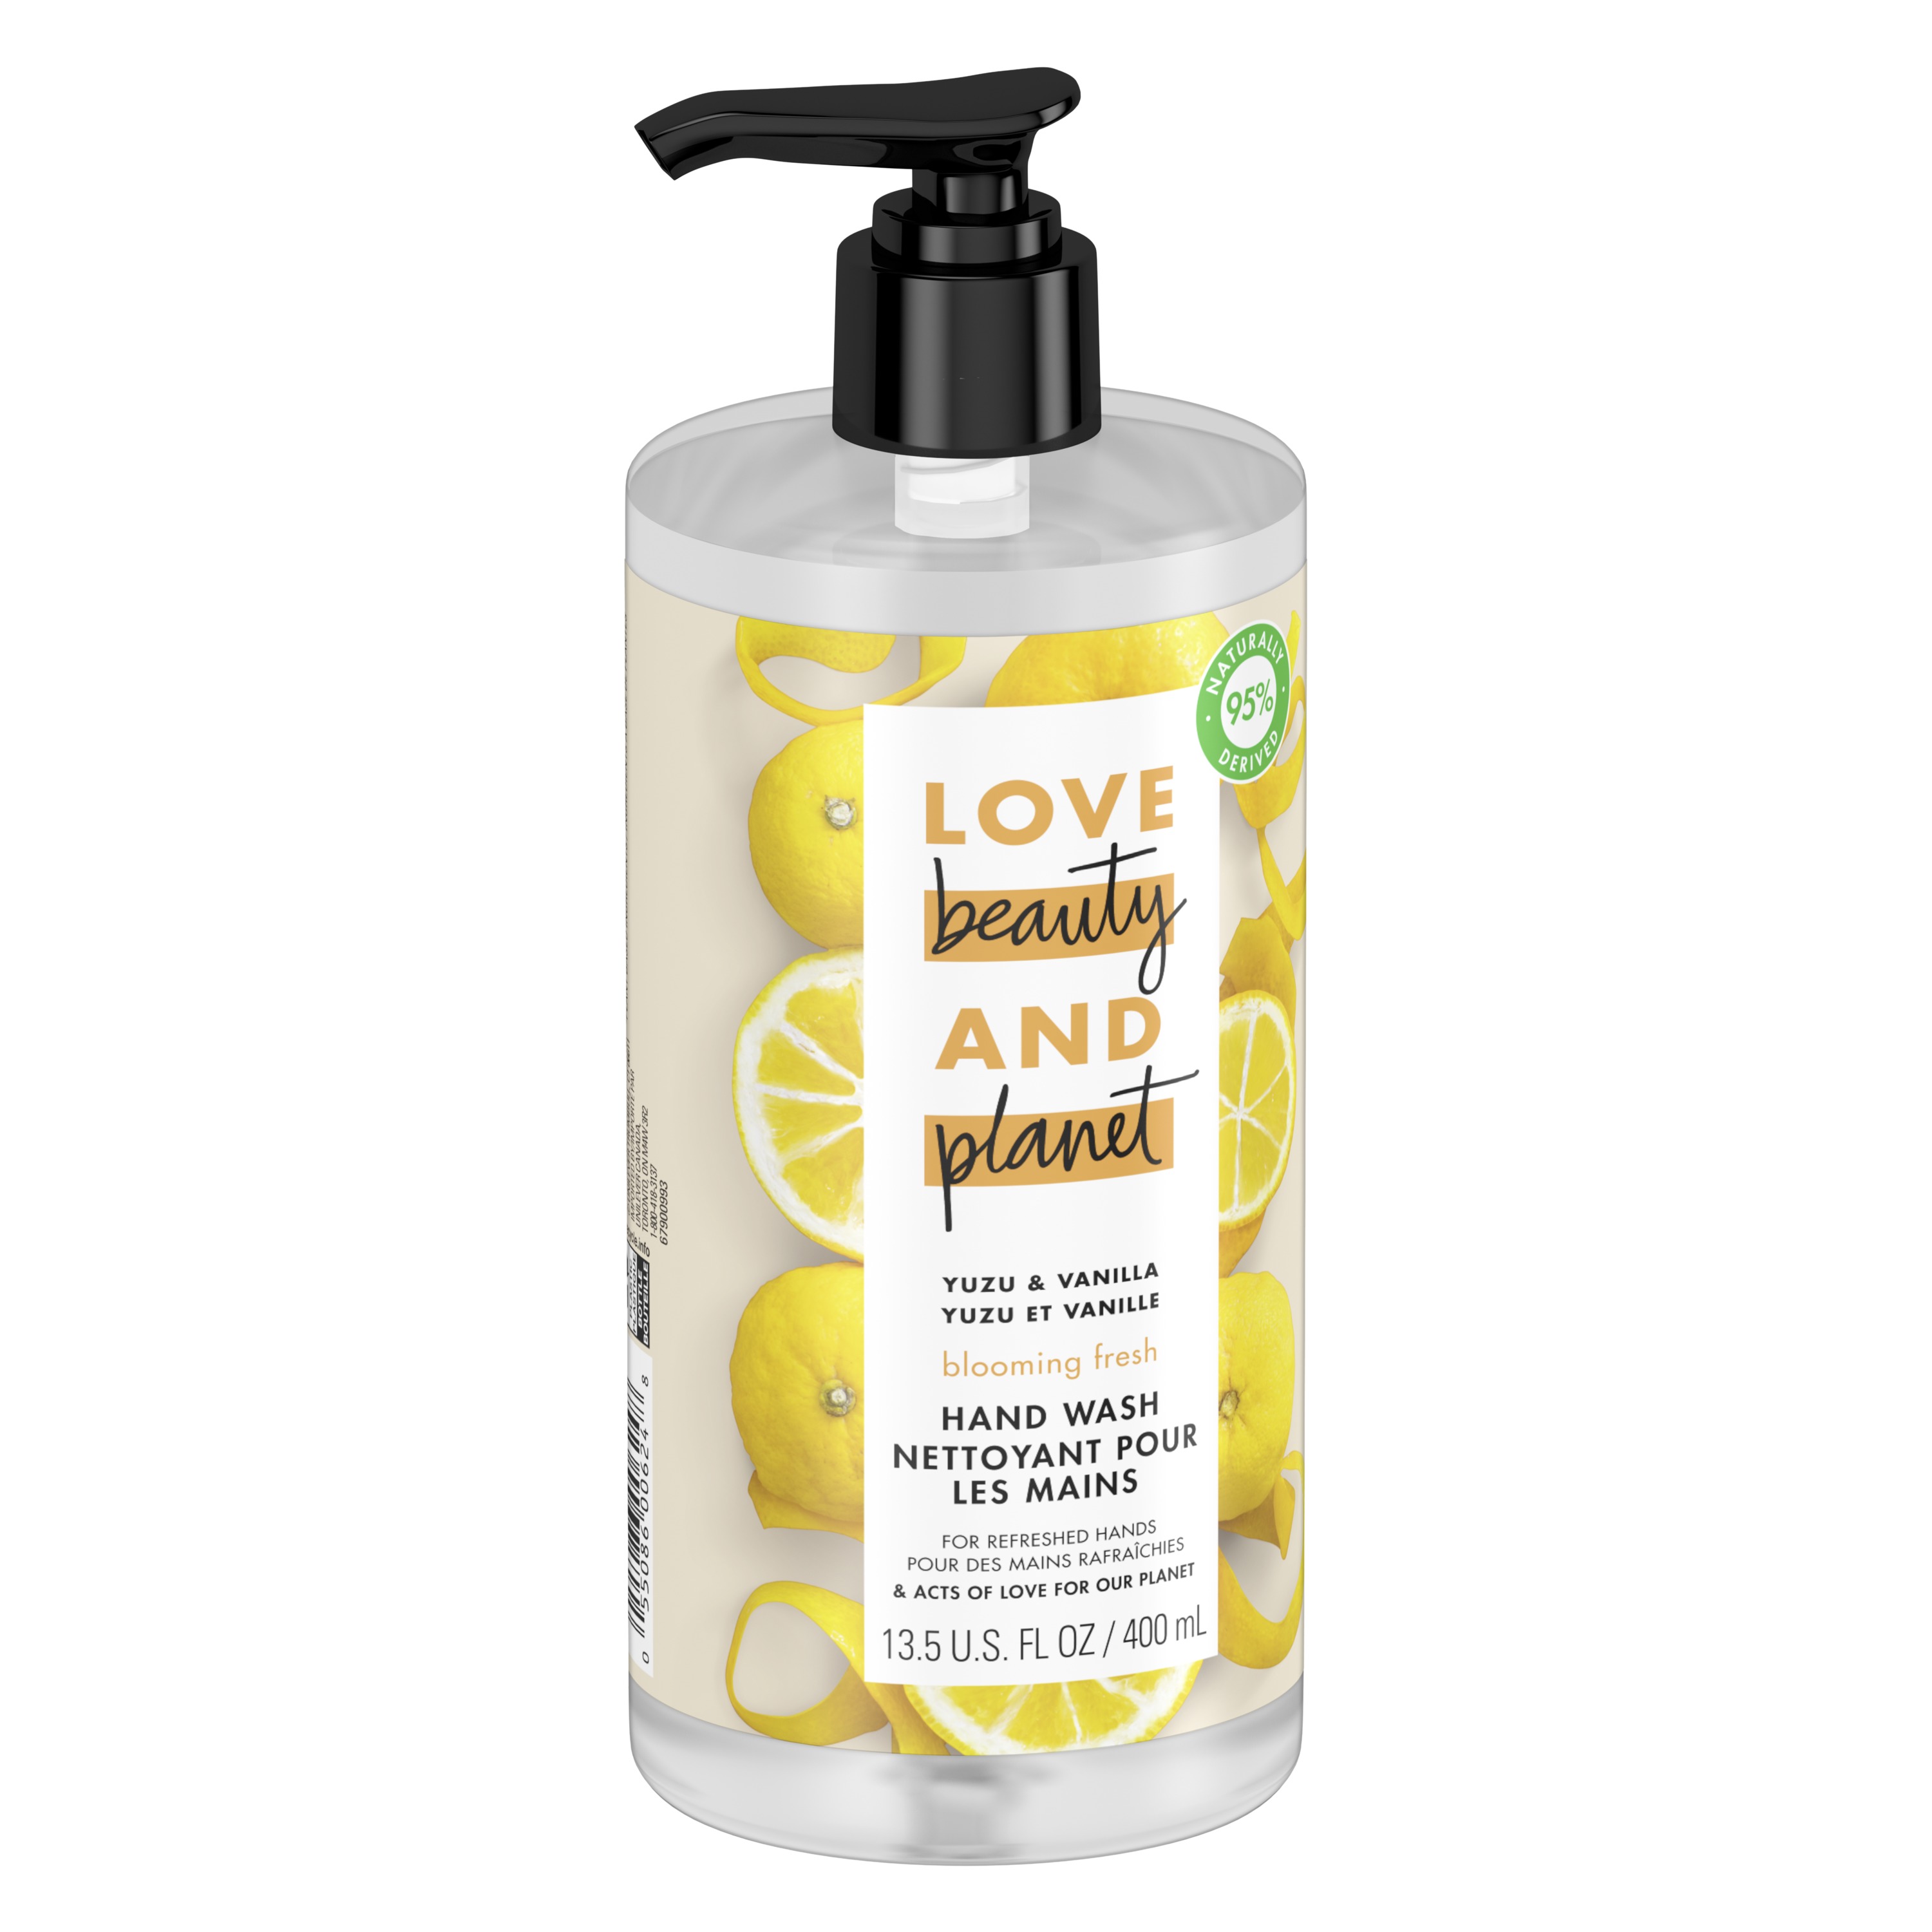 Love Beauty And Planet Blooming Fresh Hand Soap Yuzu & Vanilla 13.5 oz - image 3 of 8